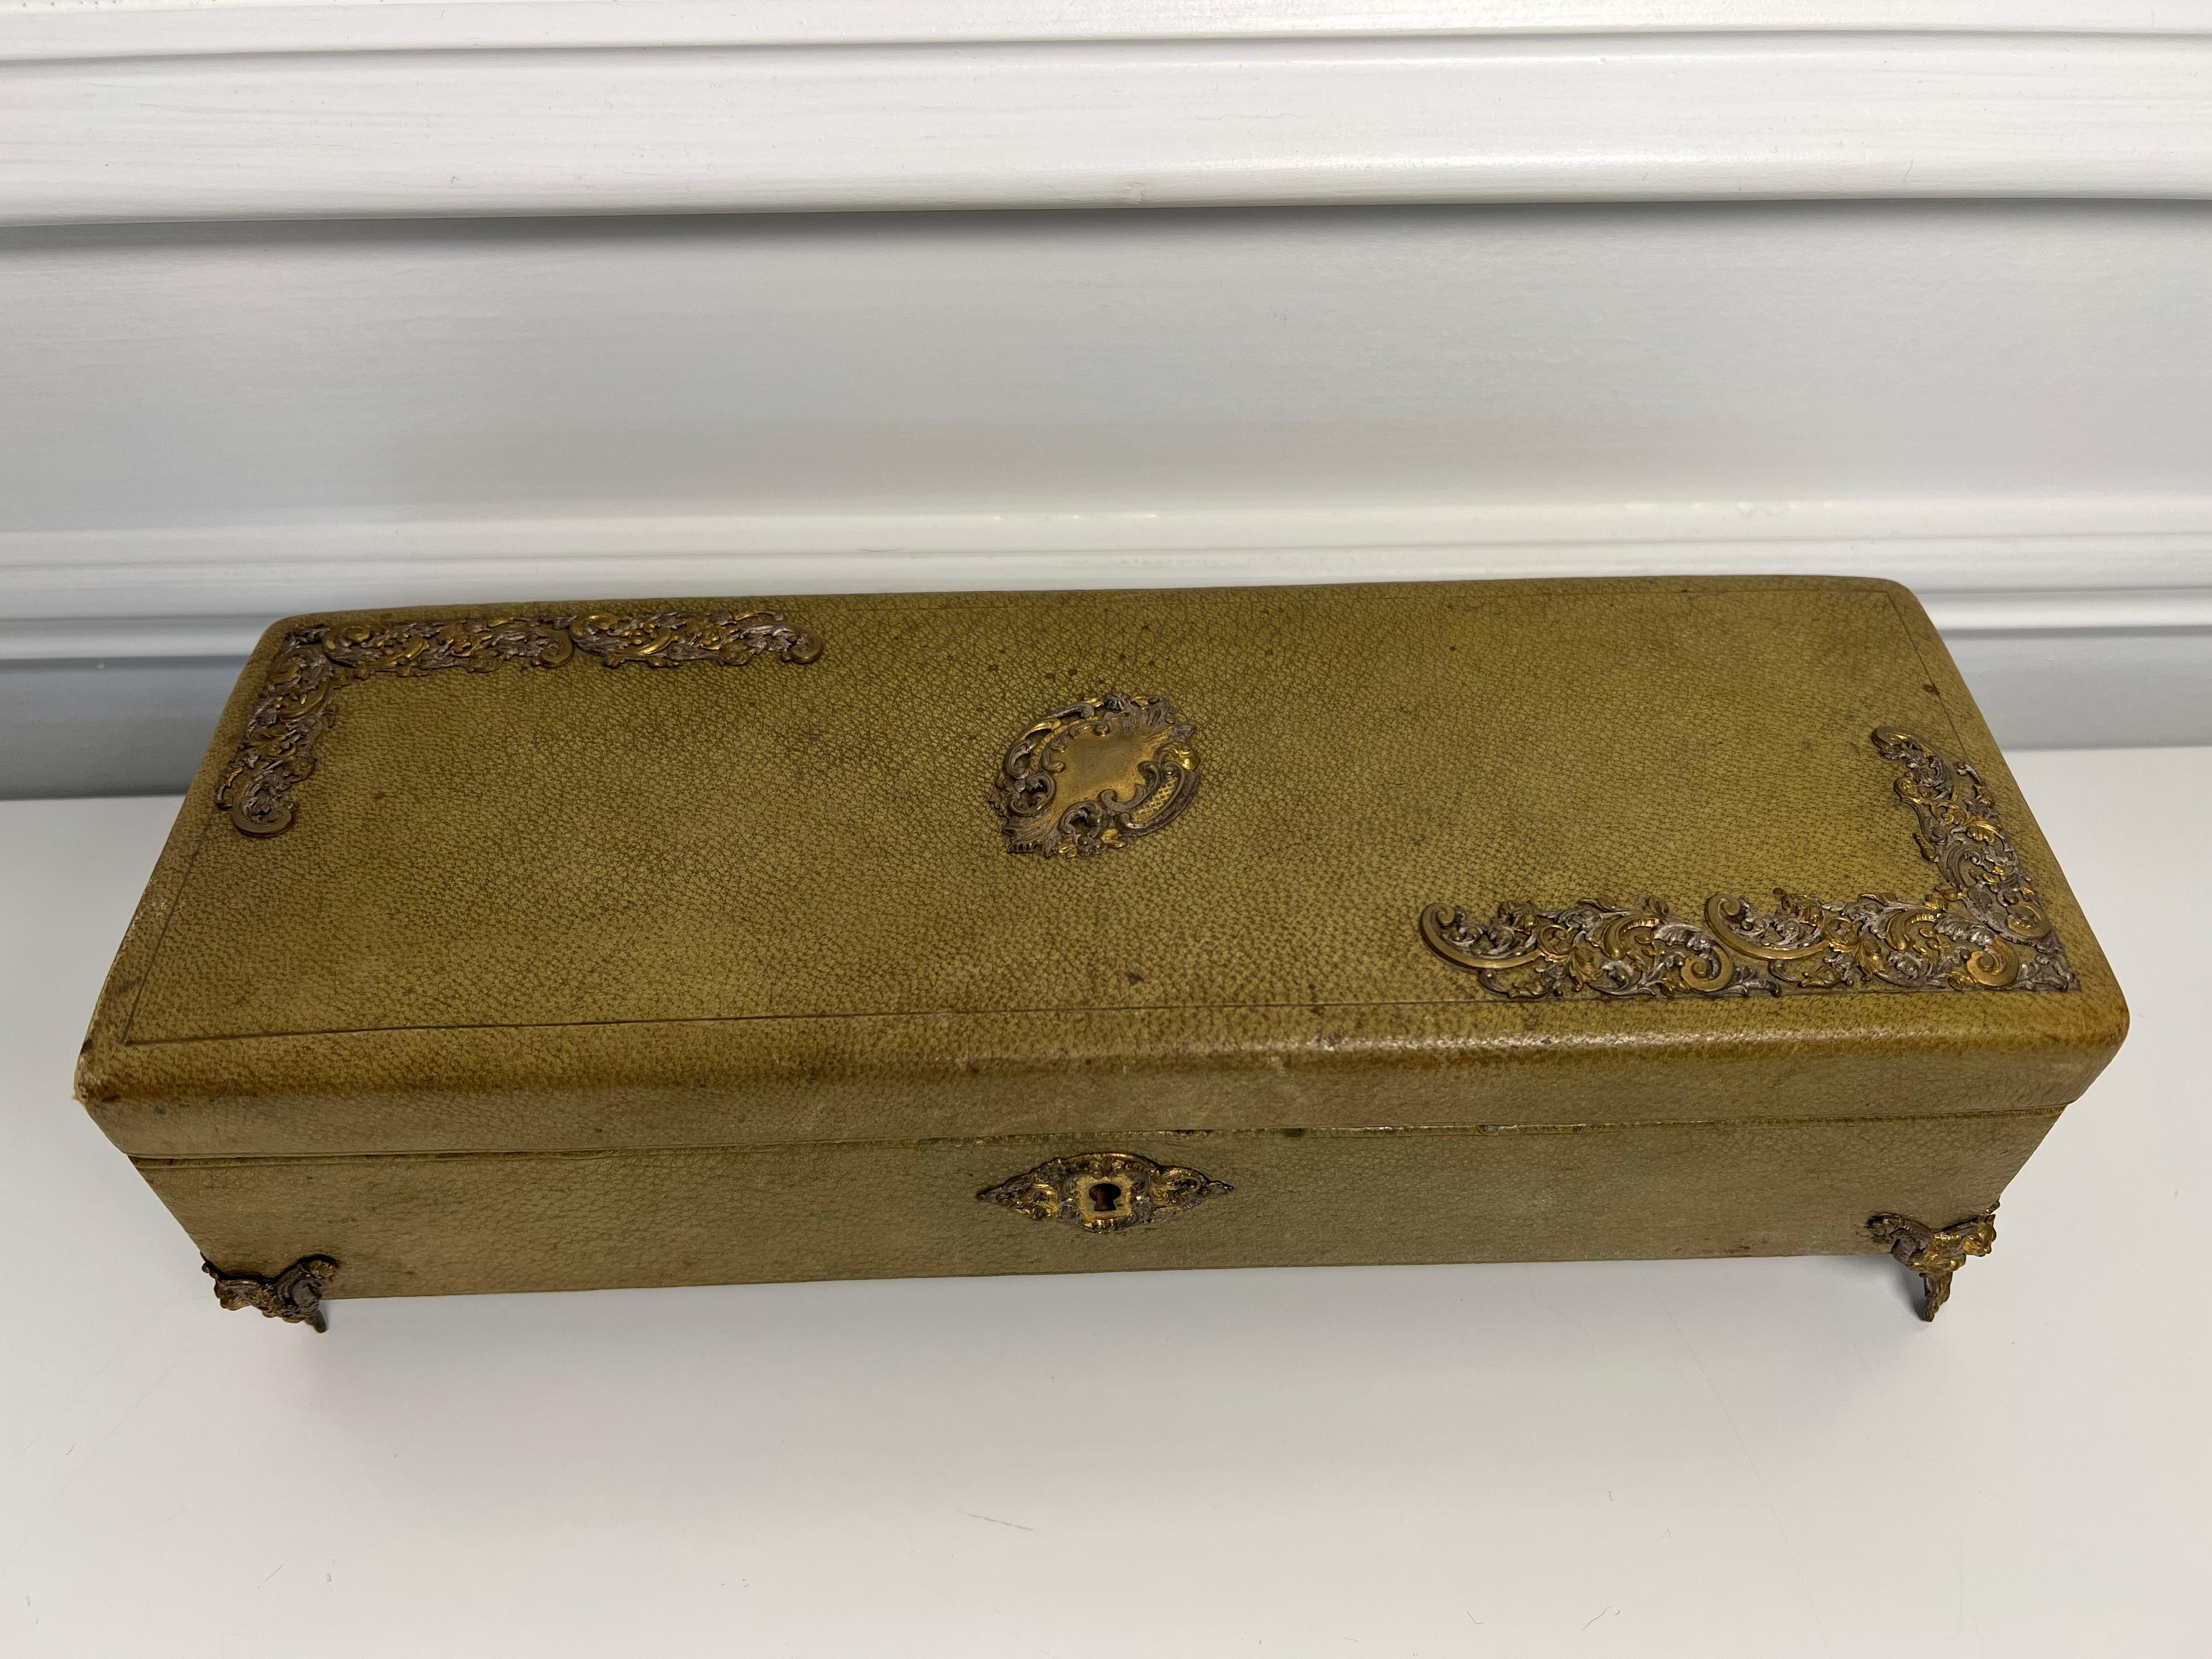 A nice early French green leather glove box with brass ormolu on four decorative brass feet, with a beautiful pink silk interior. This is from a private collector who traveled the world buying great pieces.